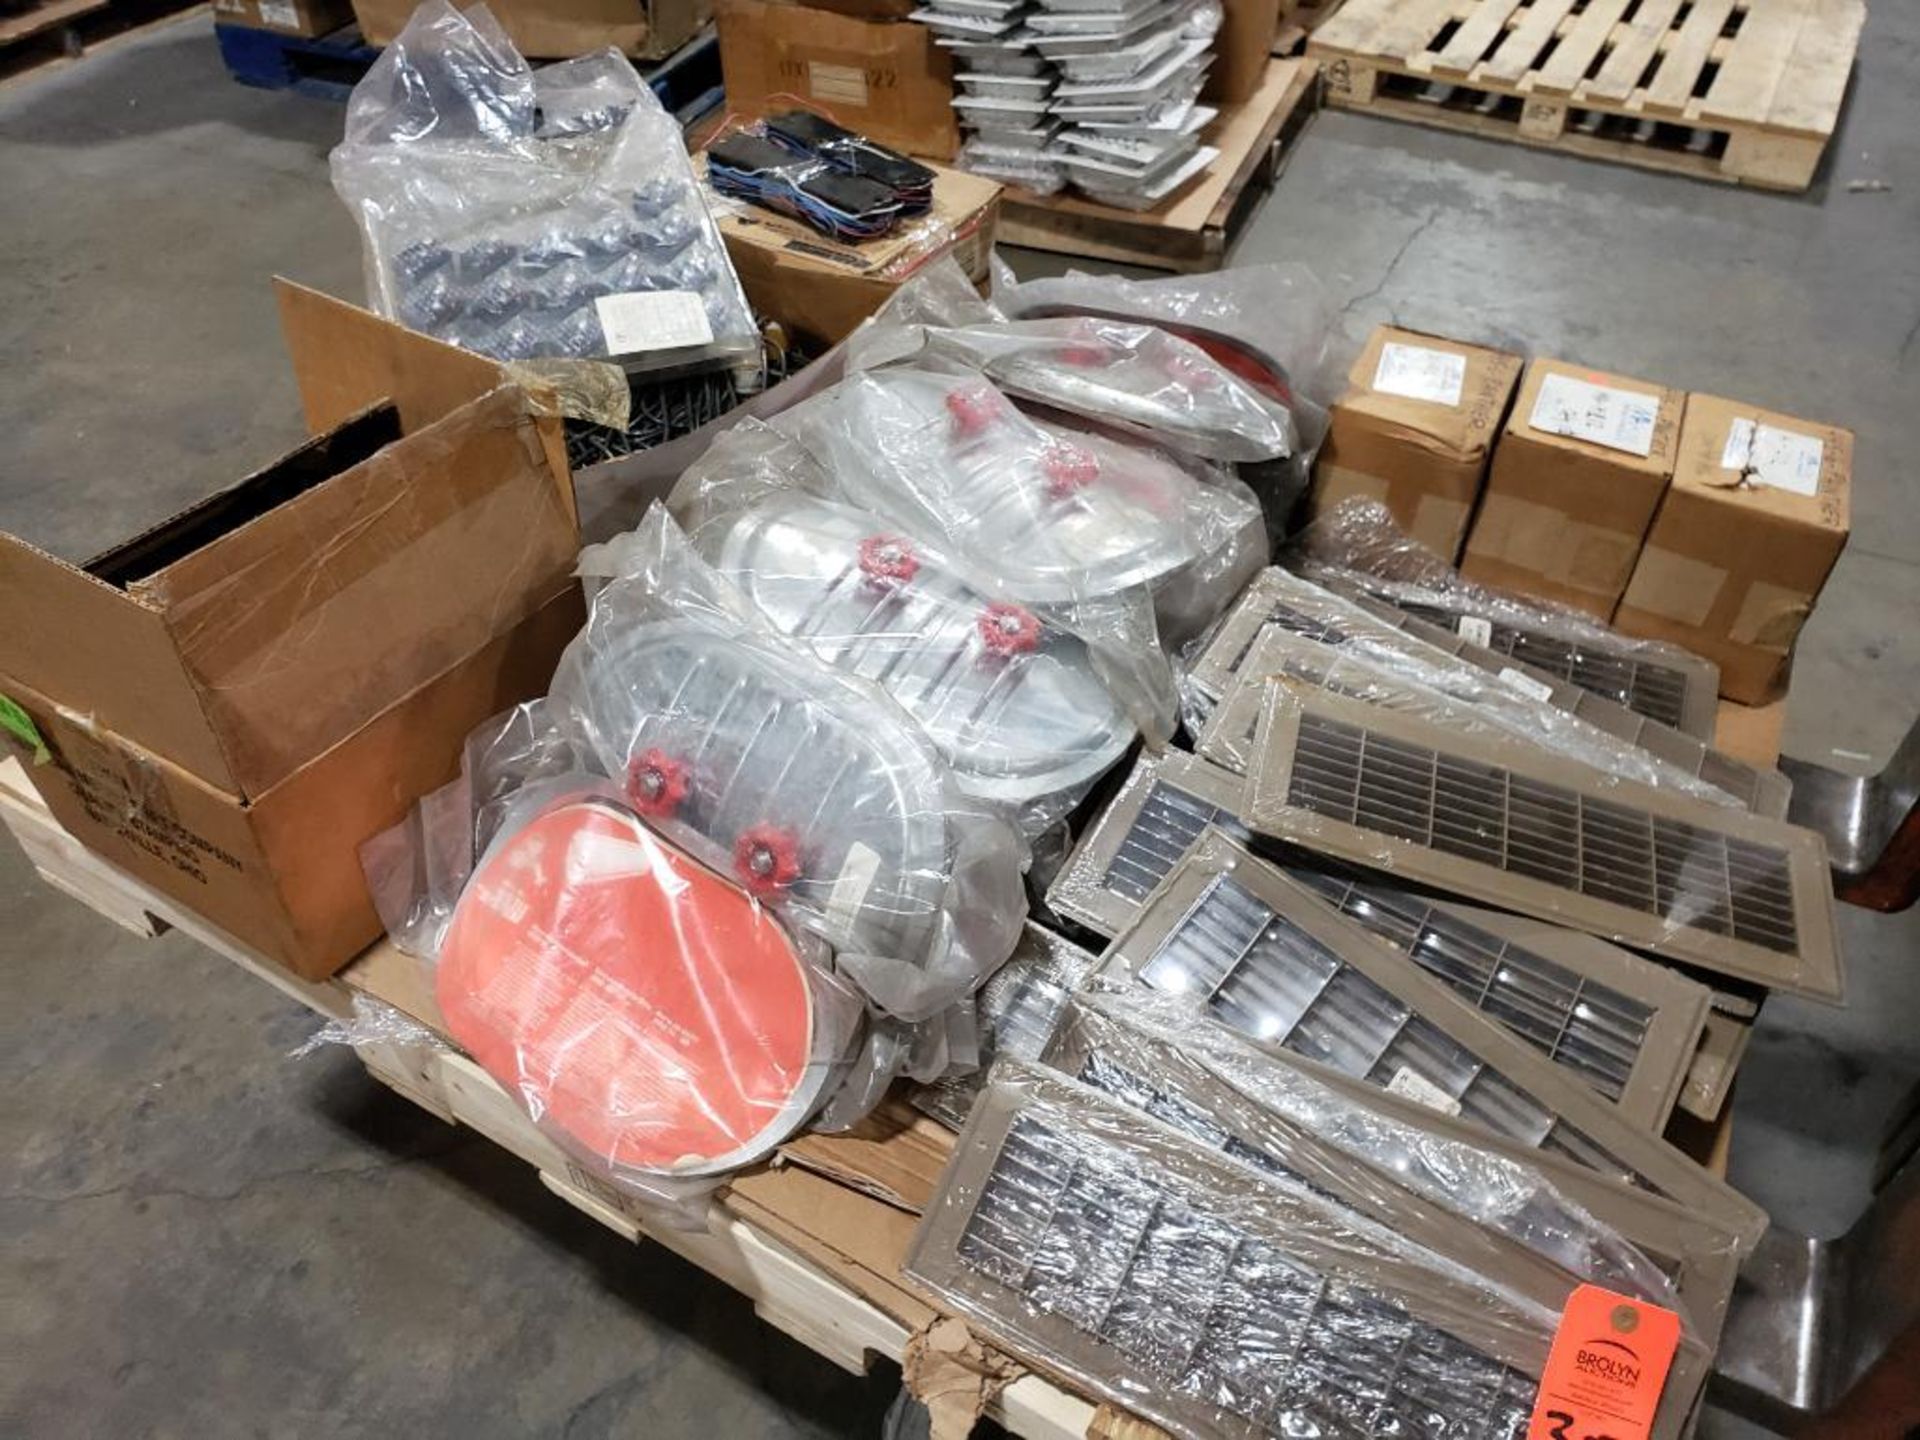 Pallet of assorted hardware and parts.